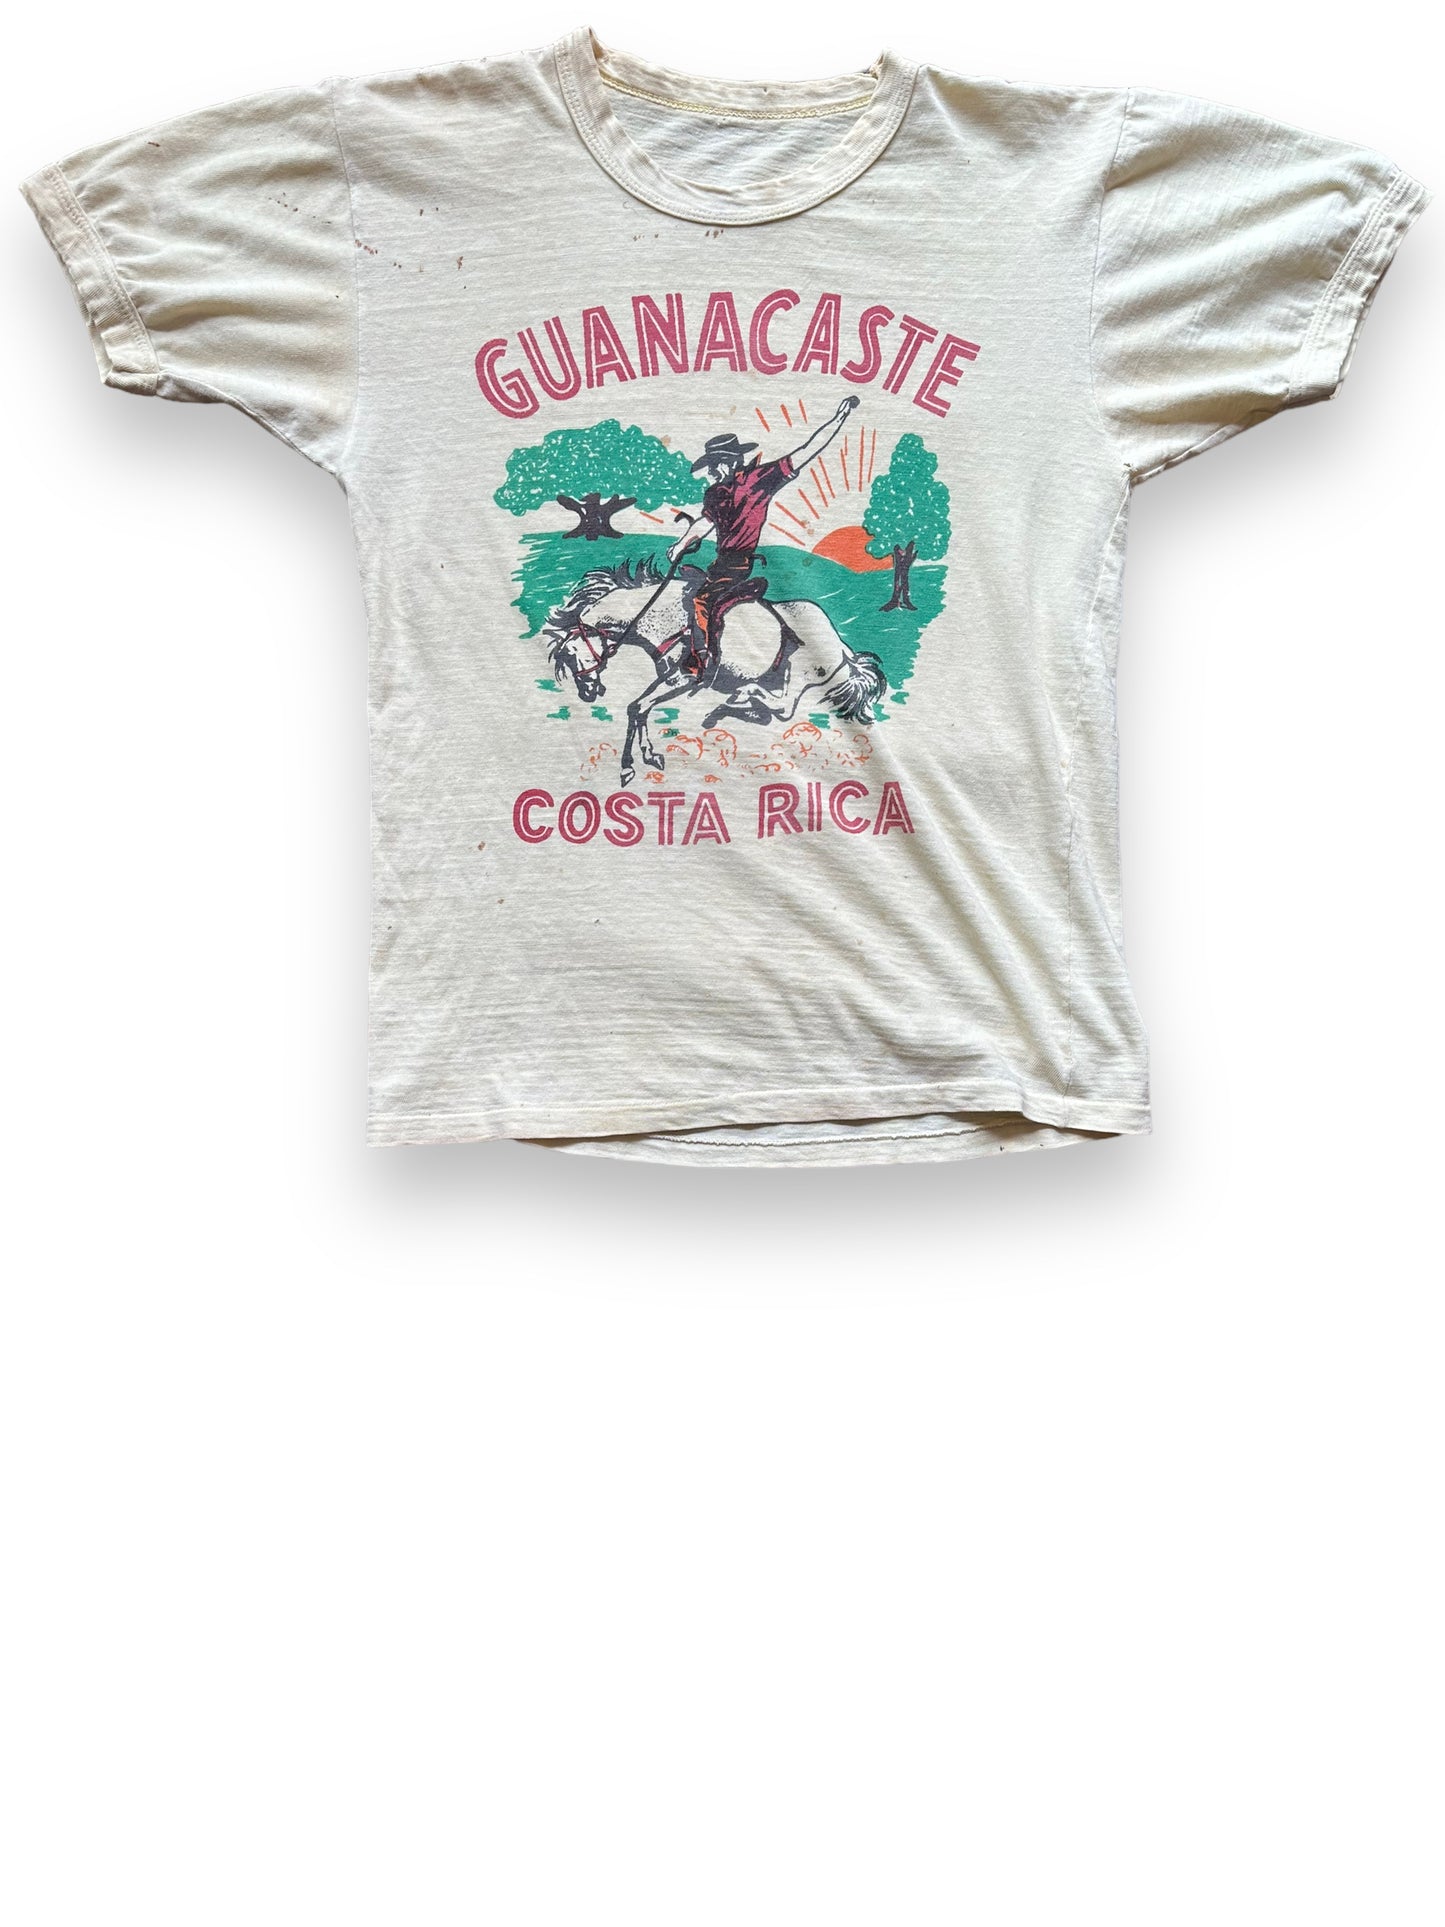 Front View of Vintage Costa Rica Guanacaste Tourist Tee SZ M | Vintage Screen Printed Tees Seattle | Barn Owl Vintage Goods